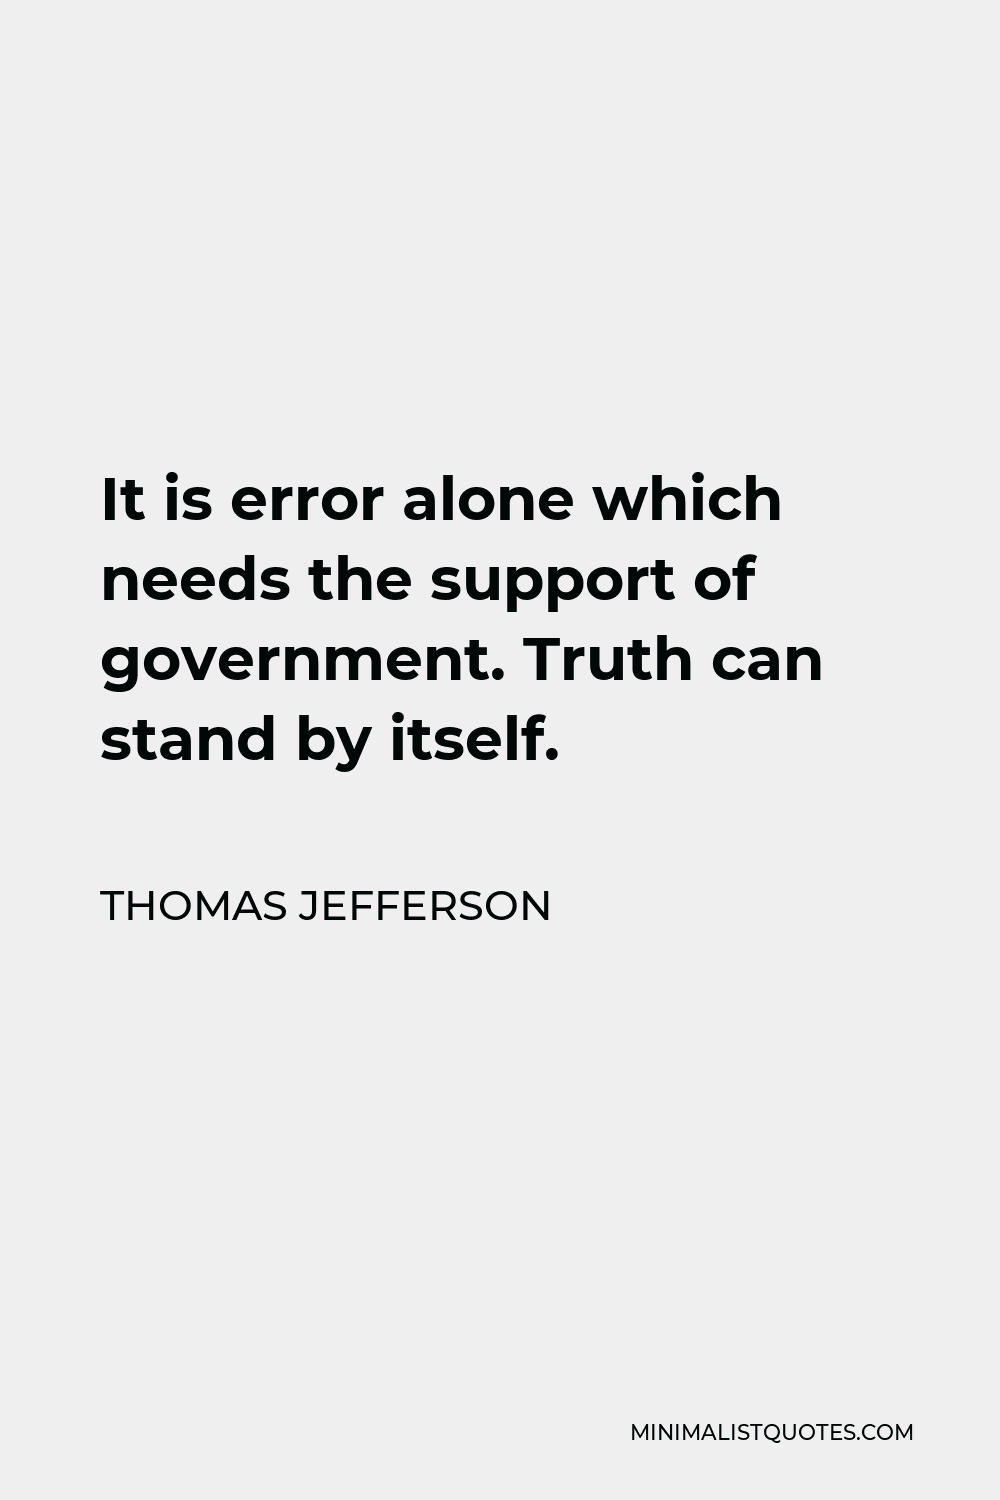 Thomas Jefferson Quote - It is error alone which needs the support of government. Truth can stand by itself.